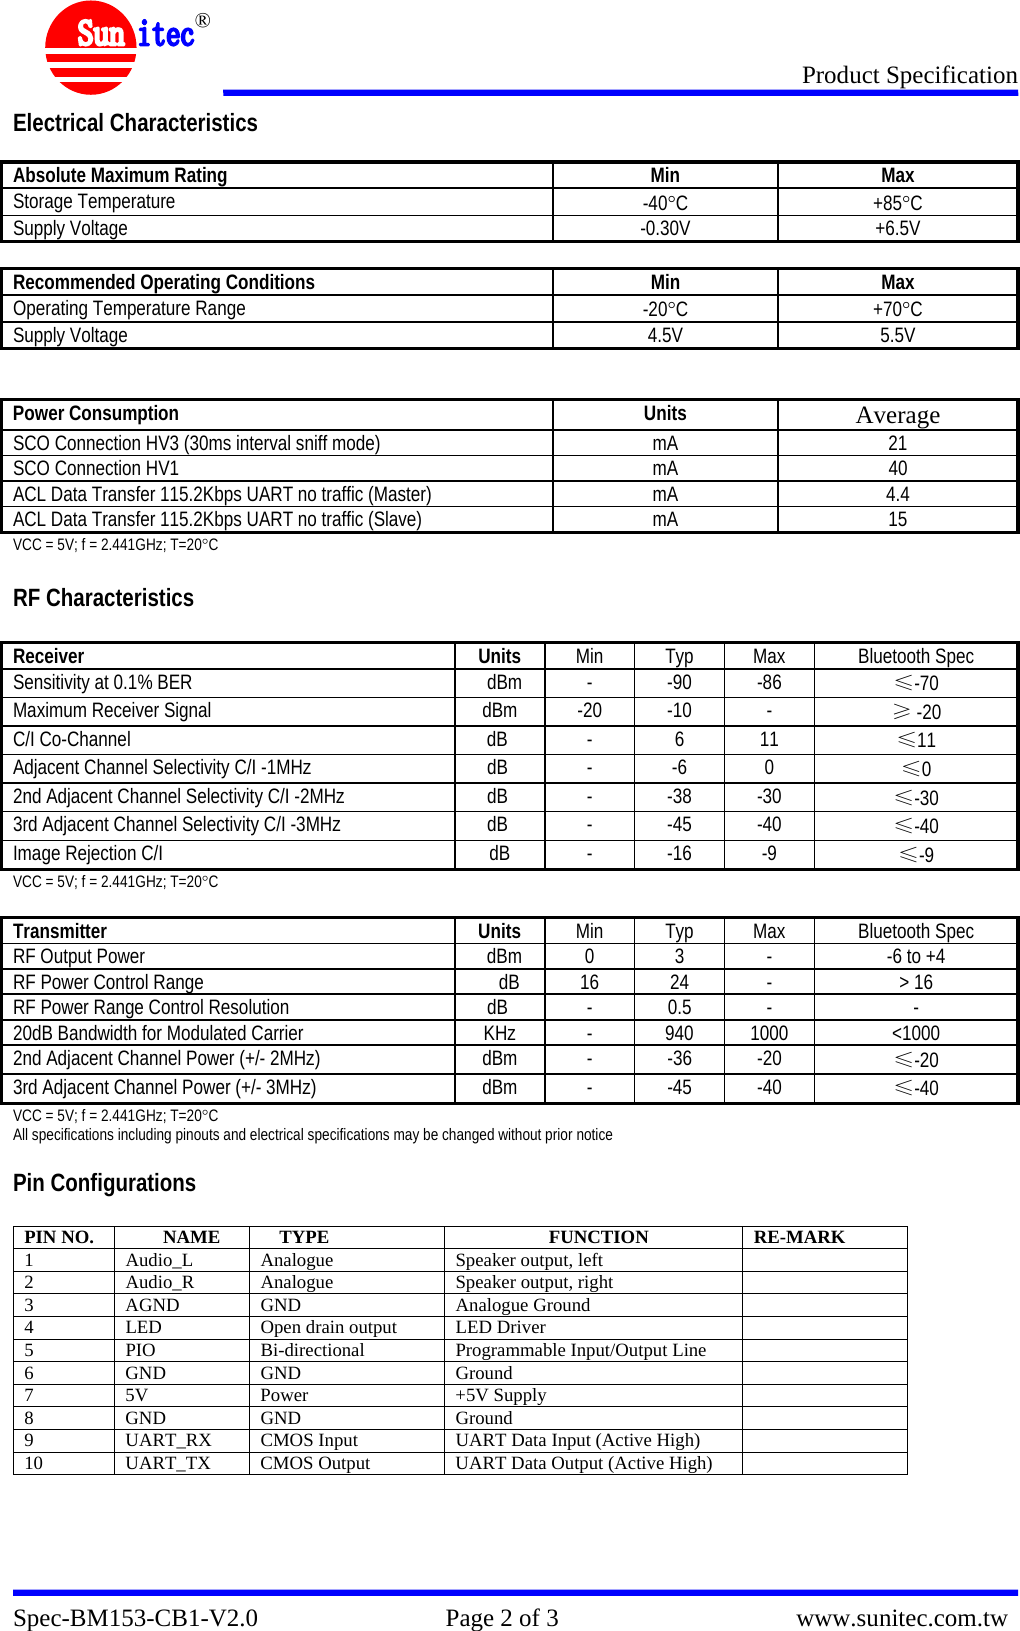 Product Specification Spec-BM153-CB1-V2.0                              Page 2 of 3                                      www.sunitec.com.tw  ® Electrical Characteristics  Absolute Maximum Rating  Min  Max Storage Temperature  -40°C +85°C Supply Voltage  -0.30V  +6.5V  Recommended Operating Conditions  Min  Max Operating Temperature Range  -20°C +70°C Supply Voltage  4.5V  5.5V   Power Consumption  Units  Average SCO Connection HV3 (30ms interval sniff mode)  mA  21 SCO Connection HV1  mA  40 ACL Data Transfer 115.2Kbps UART no traffic (Master)  mA  4.4 ACL Data Transfer 115.2Kbps UART no traffic (Slave)  mA  15 VCC = 5V; f = 2.441GHz; T=20°C  RF Characteristics  Receiver Units Min Typ Max  Bluetooth Spec Sensitivity at 0.1% BER  dBm  -  -90  -86  ≤-70 Maximum Receiver Signal  dBm  -20  -10  -  ≥ -20 C/I Co-Channel  dB  -  6  11  ≤11 Adjacent Channel Selectivity C/I -1MHz  dB  -  -6  0  ≤0 2nd Adjacent Channel Selectivity C/I -2MHz  dB  -  -38  -30  ≤-30 3rd Adjacent Channel Selectivity C/I -3MHz  dB  -  -45  -40  ≤-40 Image Rejection C/I  dB  -  -16  -9  ≤-9 VCC = 5V; f = 2.441GHz; T=20°C  Transmitter Units Min Typ Max  Bluetooth Spec RF Output Power  dBm  0  3  -  -6 to +4 RF Power Control Range      dB  16  24  -  &gt; 16 RF Power Range Control Resolution  dB  -  0.5  -  - 20dB Bandwidth for Modulated Carrier  KHz  -  940  1000  &lt;1000 2nd Adjacent Channel Power (+/- 2MHz)  dBm  -  -36  -20  ≤-20 3rd Adjacent Channel Power (+/- 3MHz)  dBm  -  -45  -40  ≤-40 VCC = 5V; f = 2.441GHz; T=20°C All specifications including pinouts and electrical specifications may be changed without prior notice  Pin Configurations  PIN NO.  NAME  TYPE  FUNCTION  RE-MARK 1 Audio_L Analogue Speaker output, left   2 Audio_R Analogue Speaker output, right   3 AGND GND  Analogue Ground   4  LED  Open drain output  LED Driver   5  PIO  Bi-directional  Programmable Input/Output Line   6 GND GND  Ground   7 5V  Power  +5V Supply   8 GND GND  Ground   9  UART_RX  CMOS Input  UART Data Input (Active High)   10  UART_TX  CMOS Output  UART Data Output (Active High)     